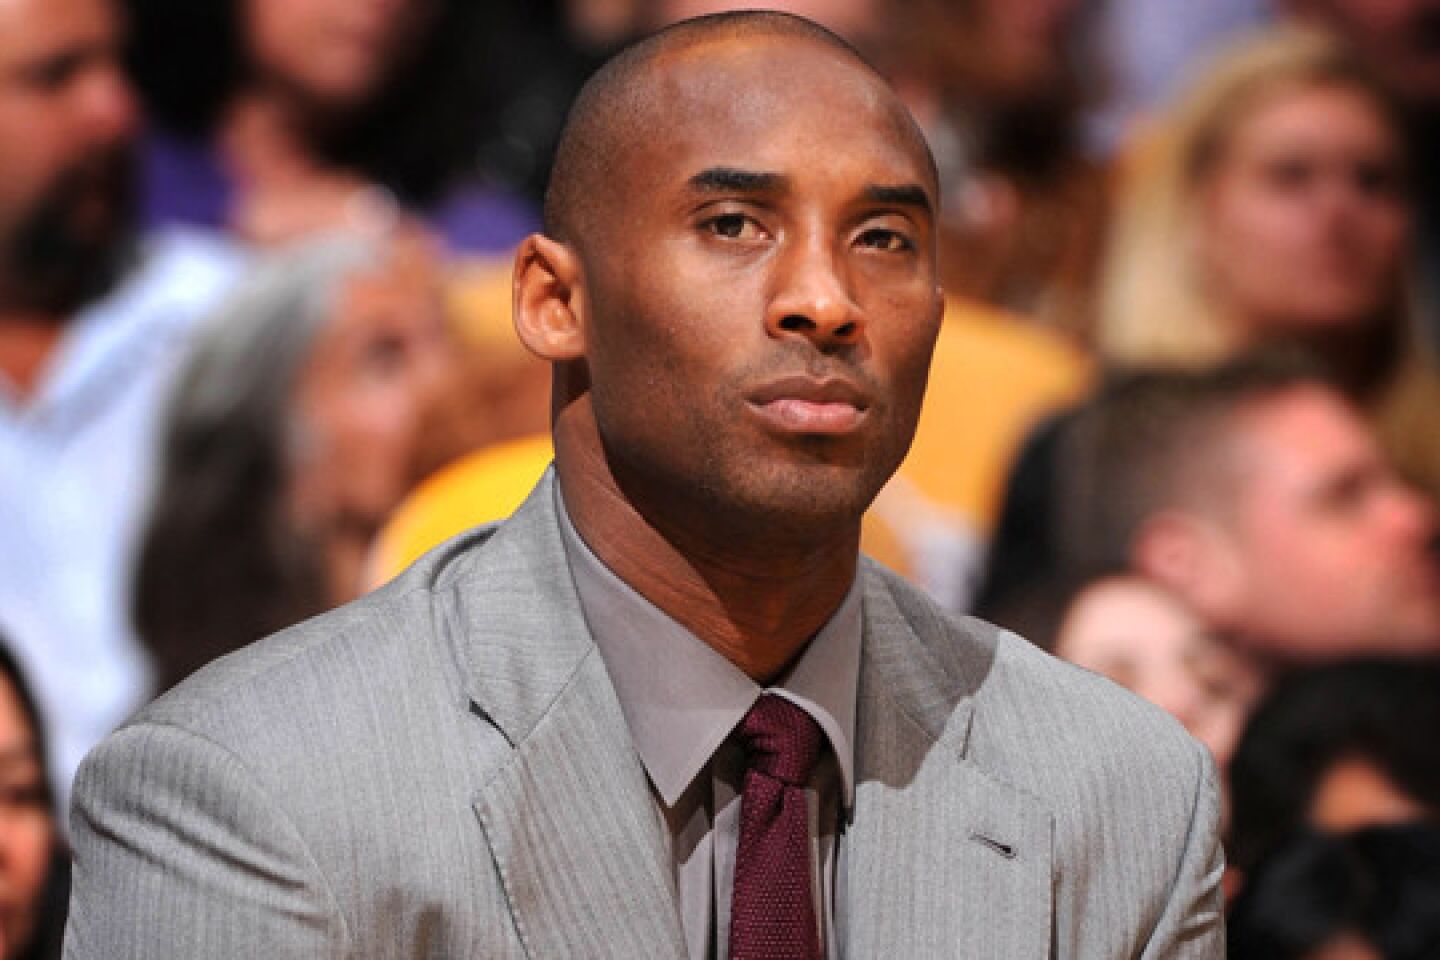 Kobe Bryant was just 18 when he started playing for the Lakers, but by the end of his 20-year career — all of it as a Laker — the Black Mamba was a five-time world champion, two-time Olympic gold medalist and 18-time All-Star. His post-basketball career included an Oscar for the animated short “Dear Basketball” and a series of children’s books that became New York Times bestsellers. He was 41.